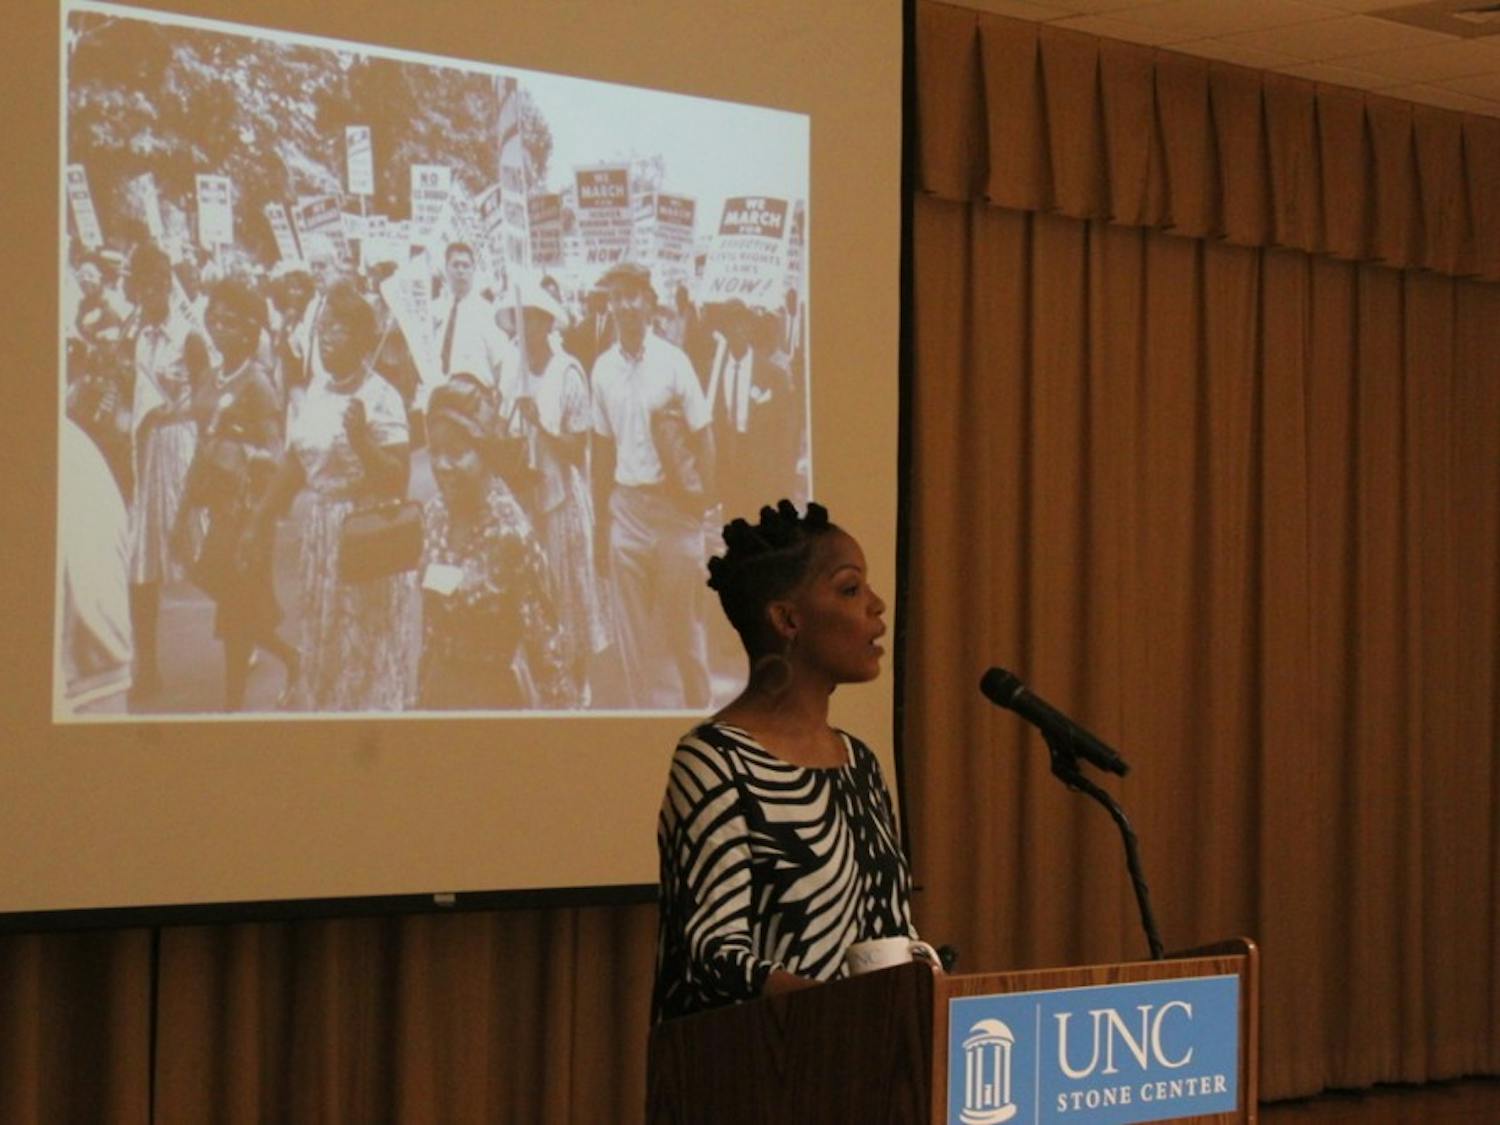 Nnenna Freelon, a Grammy-nominated jazz artist and educator, delivers the Sonya Haynes Stone Memorial Lecture on Oct. 2, 2018 in Sonya Haynes Stone Center. This lecture was a part of the Stone Center's 30th anniversary programming. 